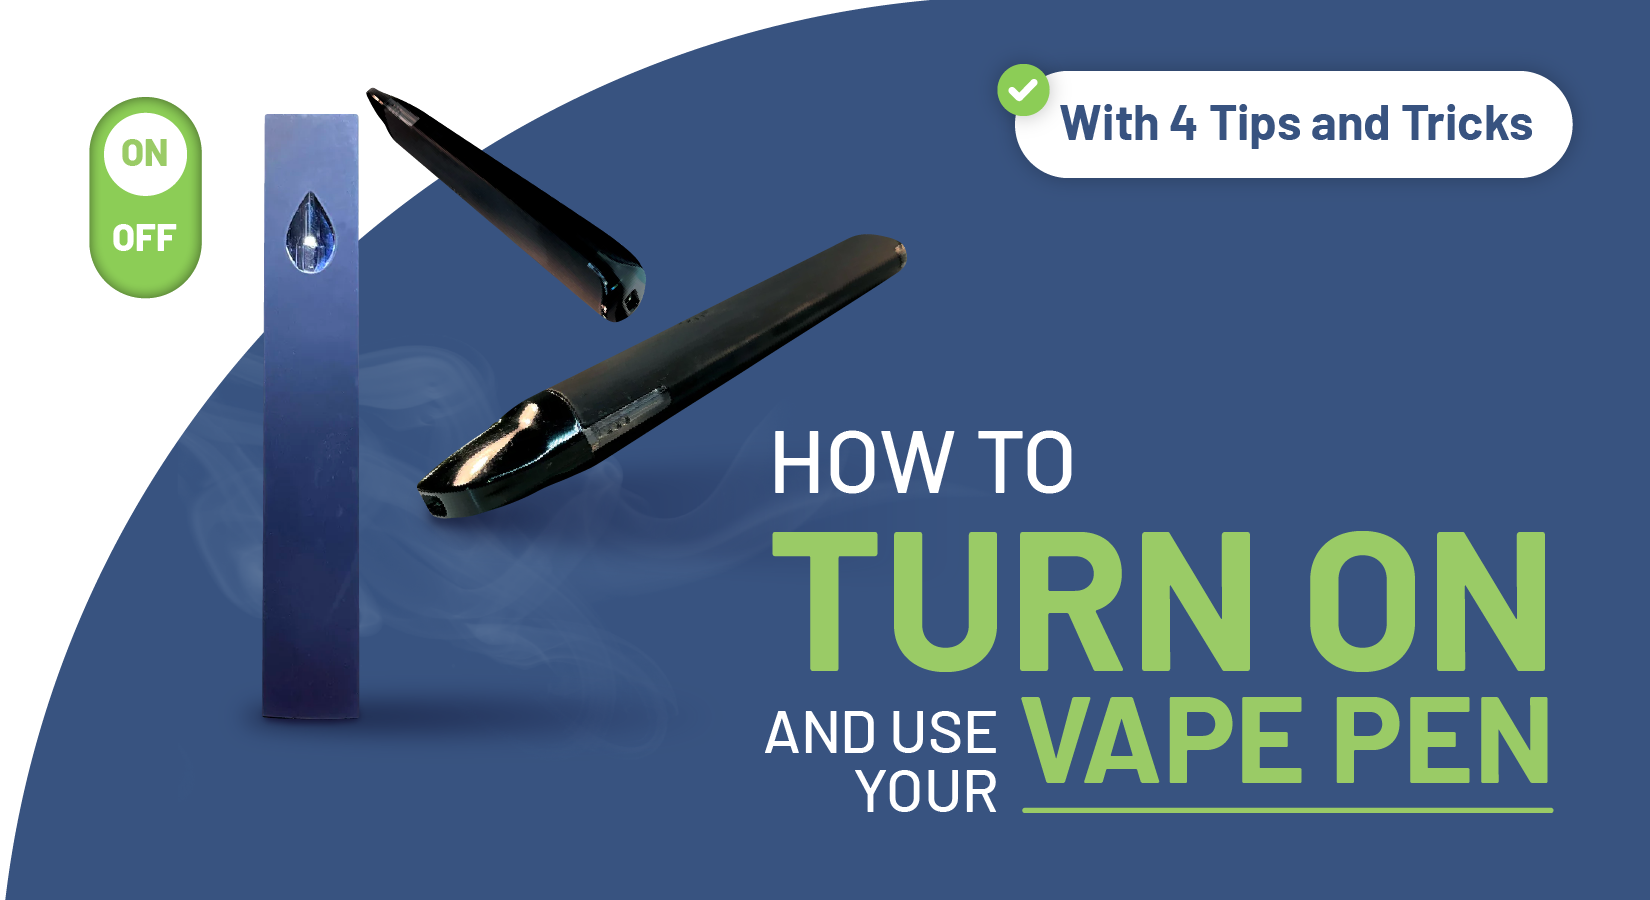 How to Turn On and Use Your Vape Pen? (With 4 Tips and Tricks)